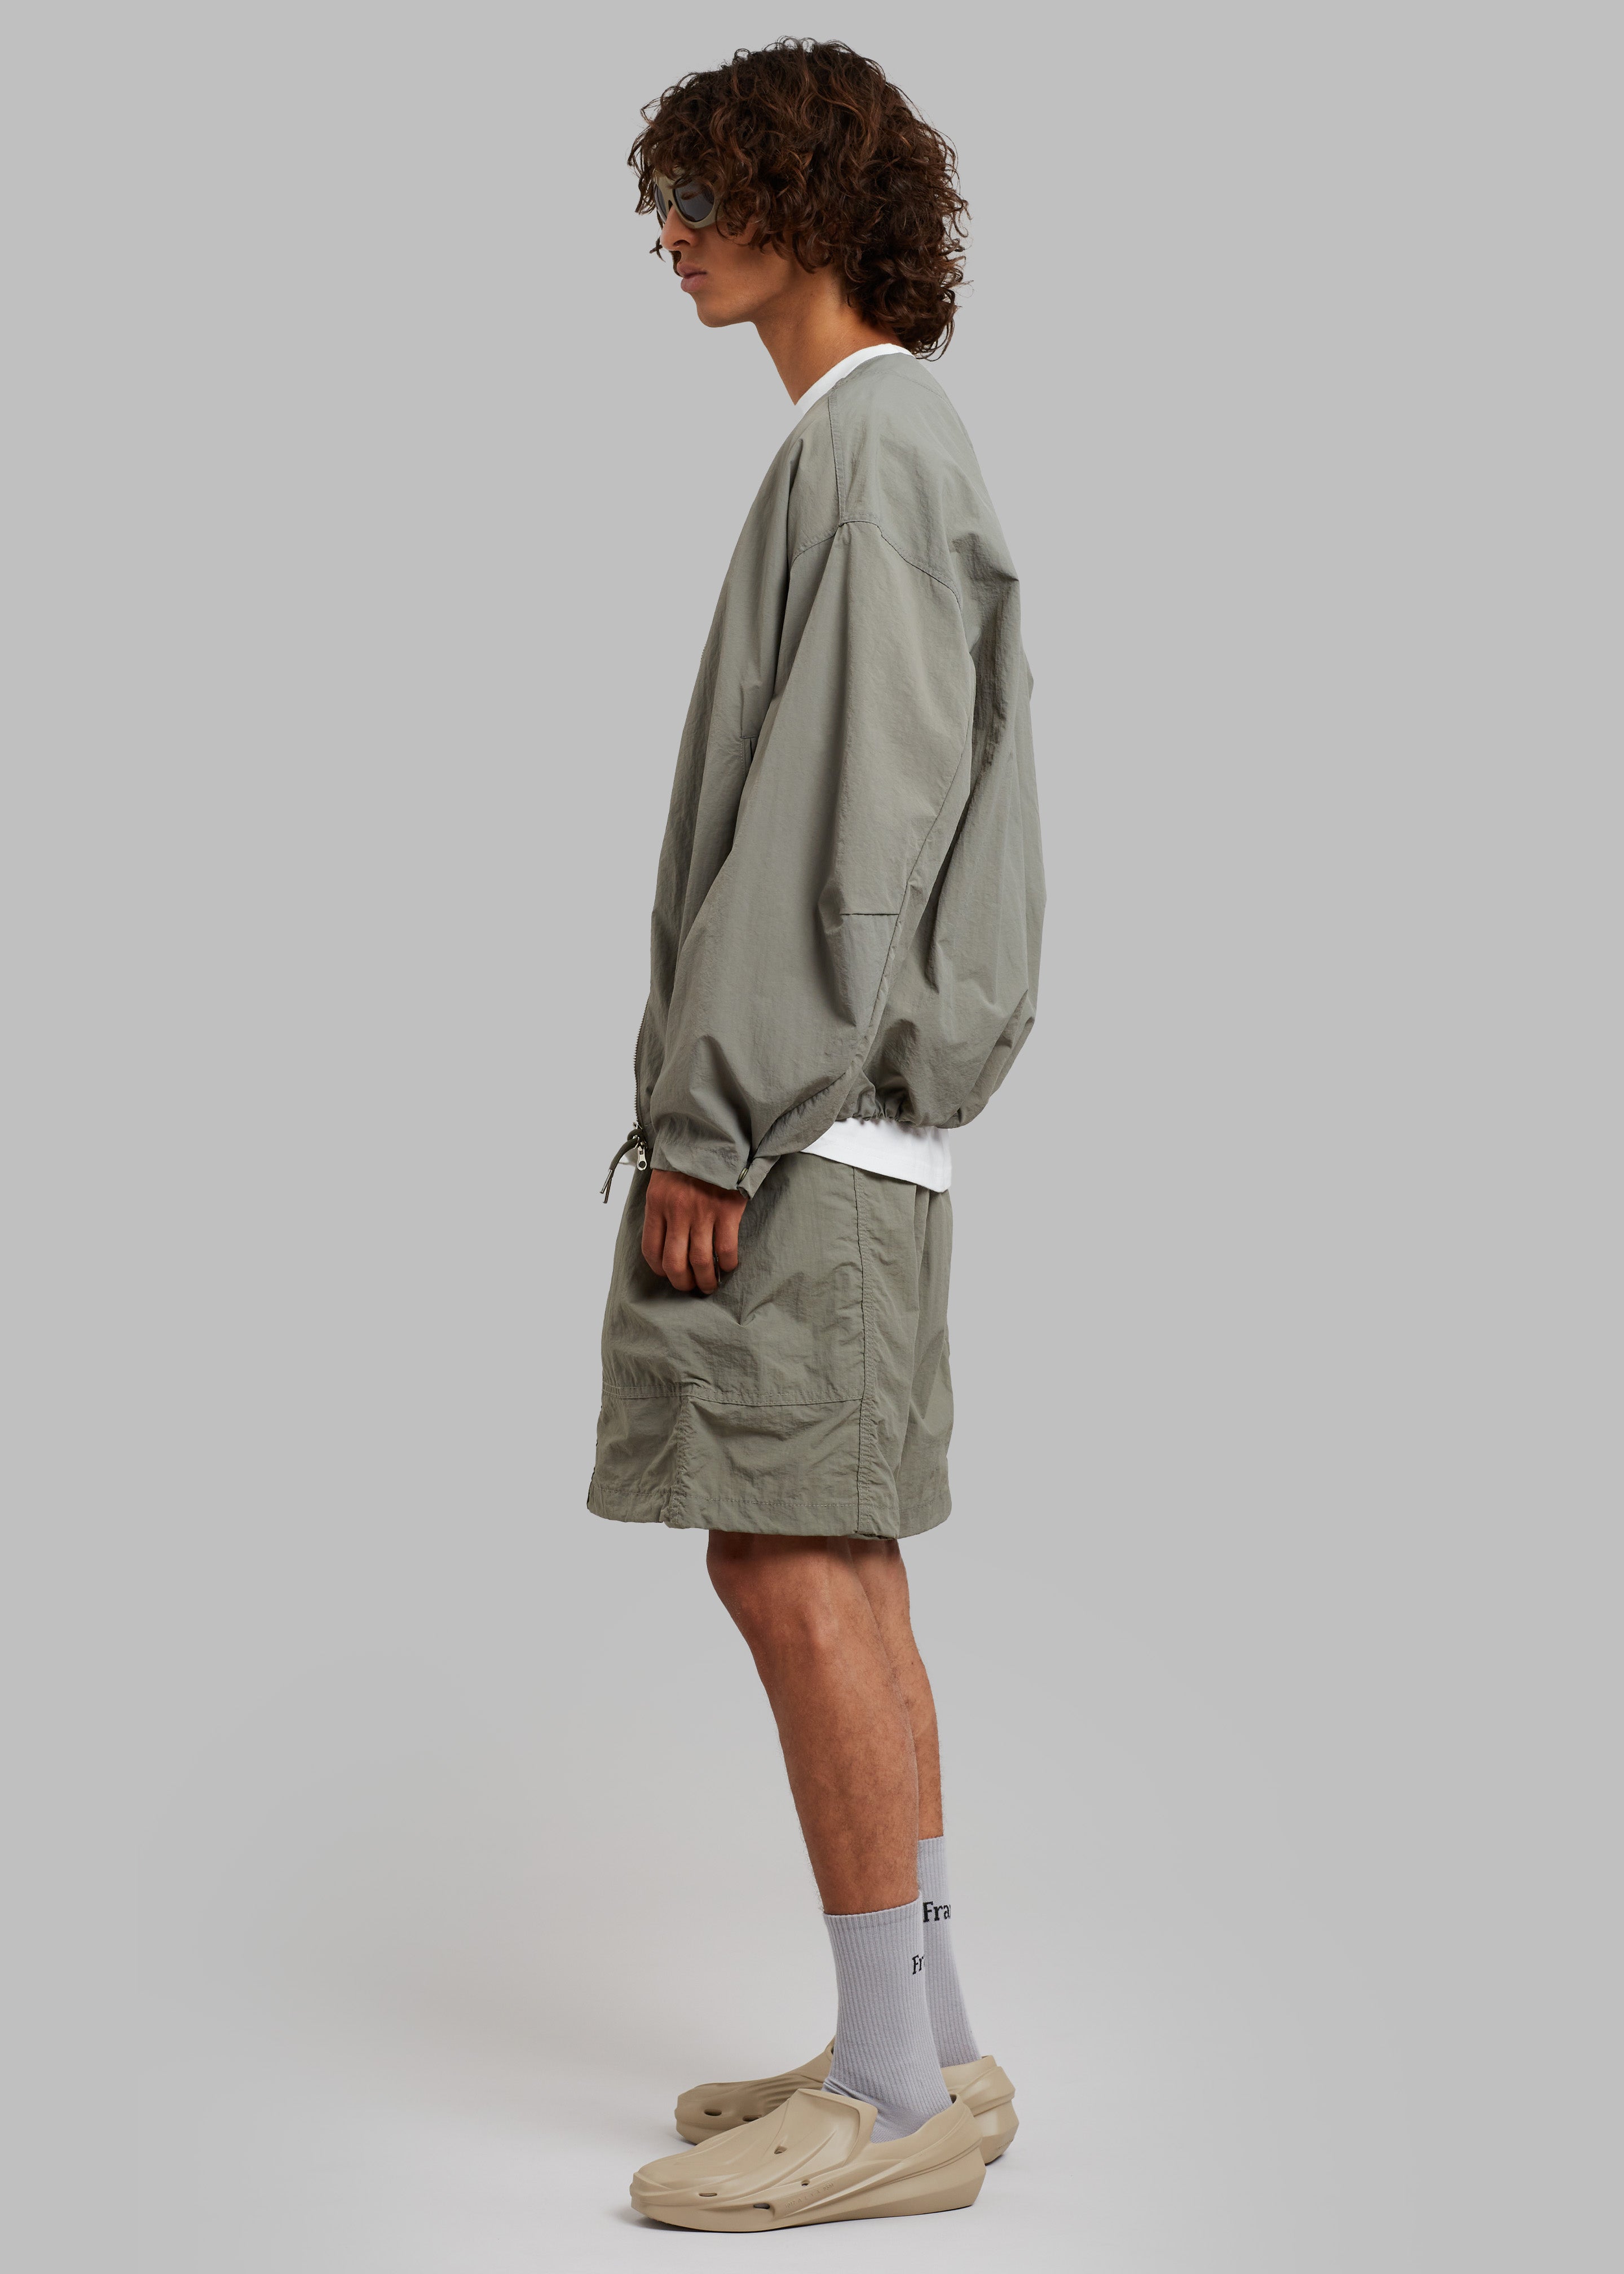 Arel Buckle Shorts - Olive